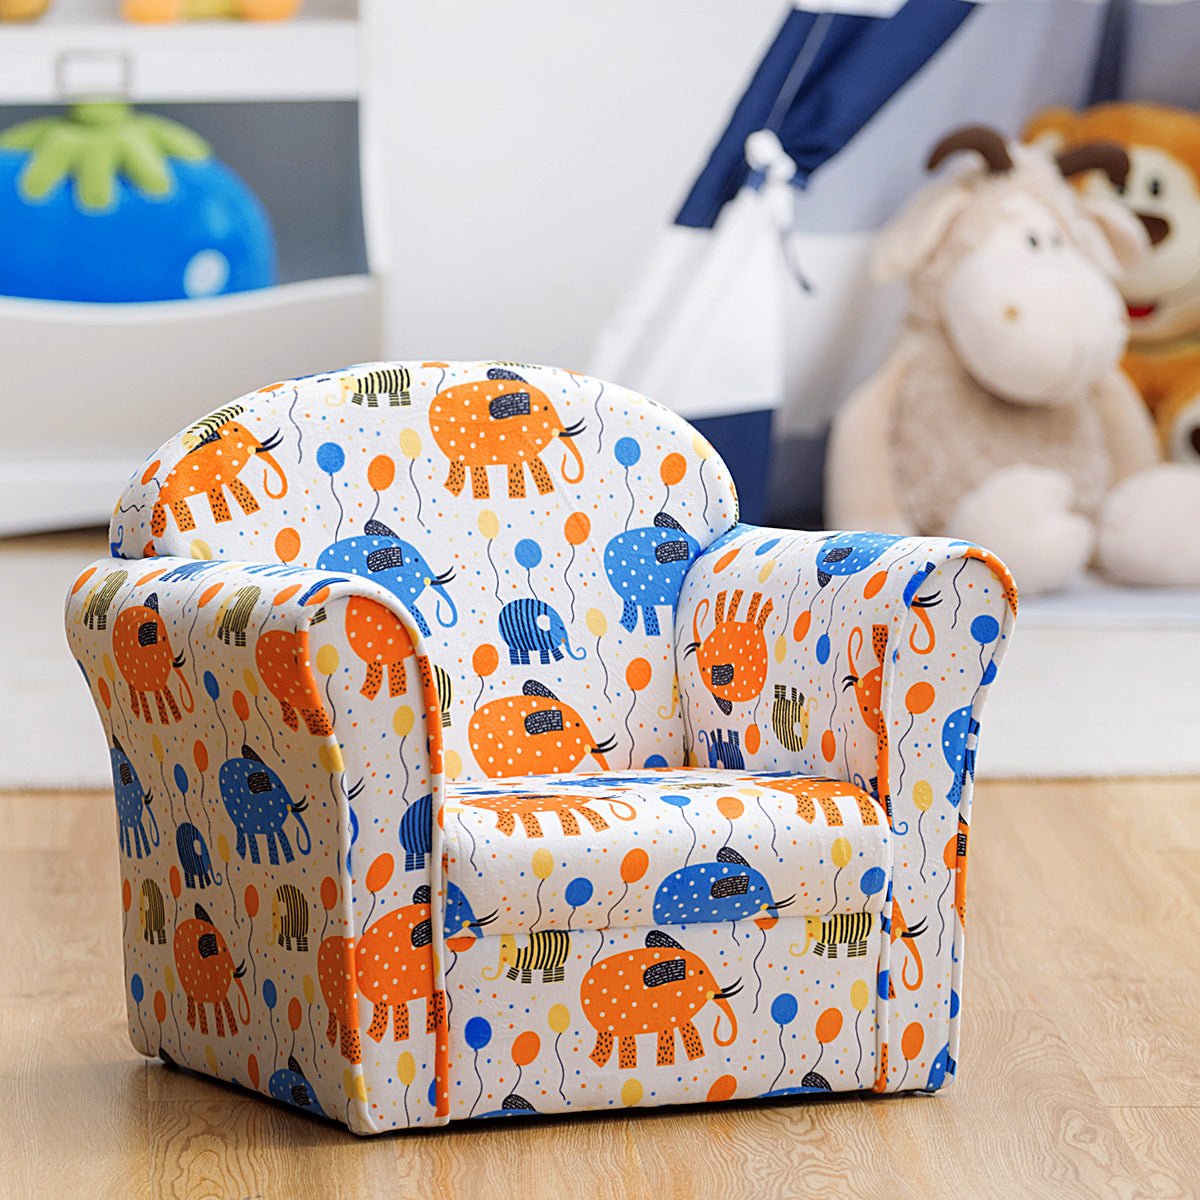 Adorable Velvet Kids Sofa with Charming Pattern: Perfect for Baby Room